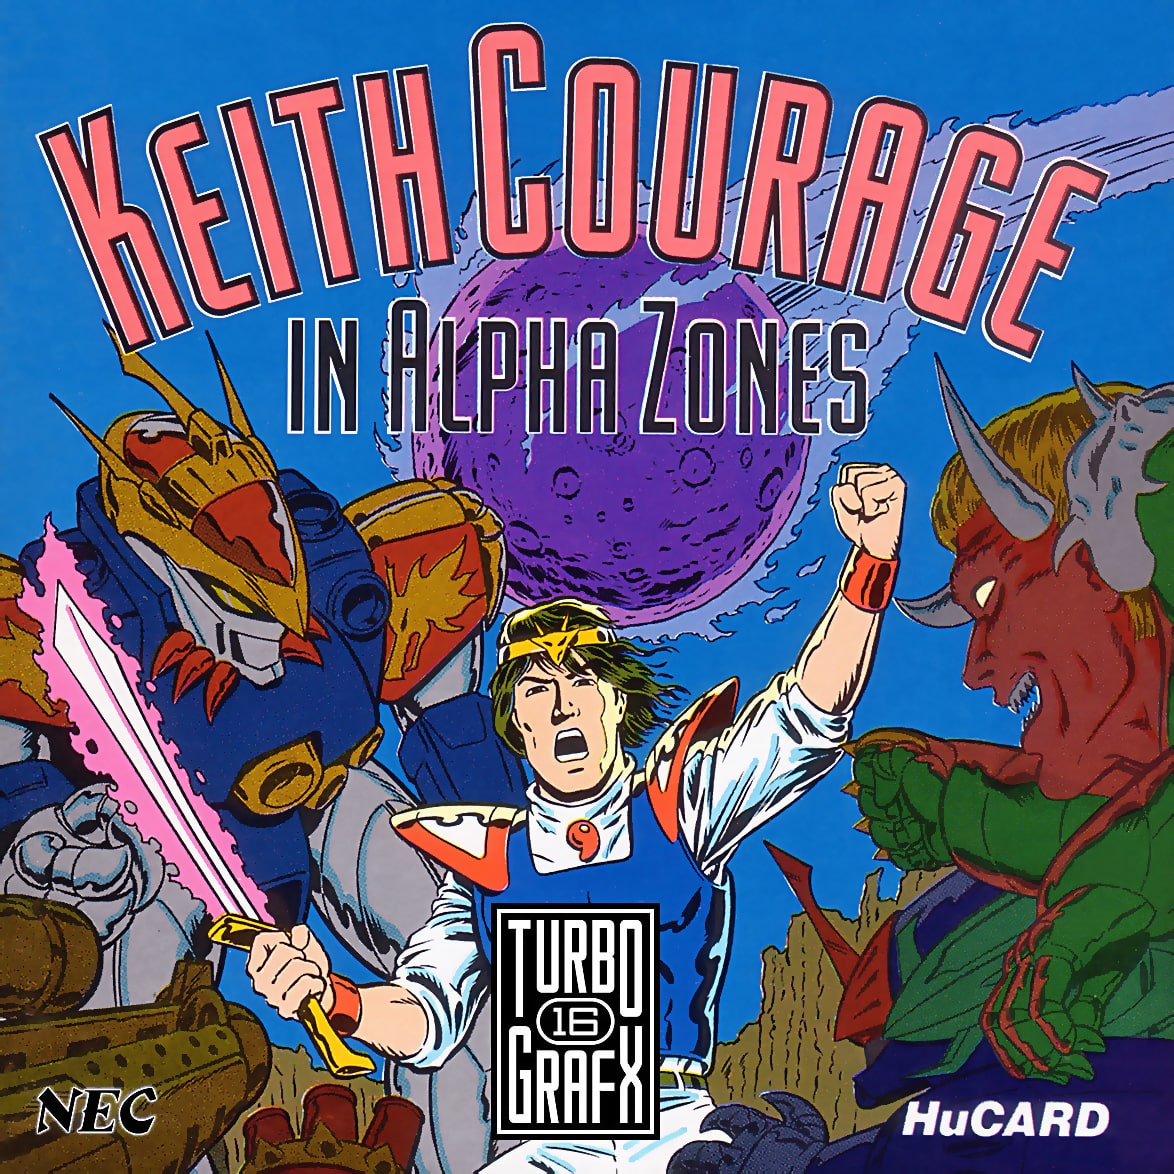 Keith Courage in Alpha Zones | TurboGrafx-16